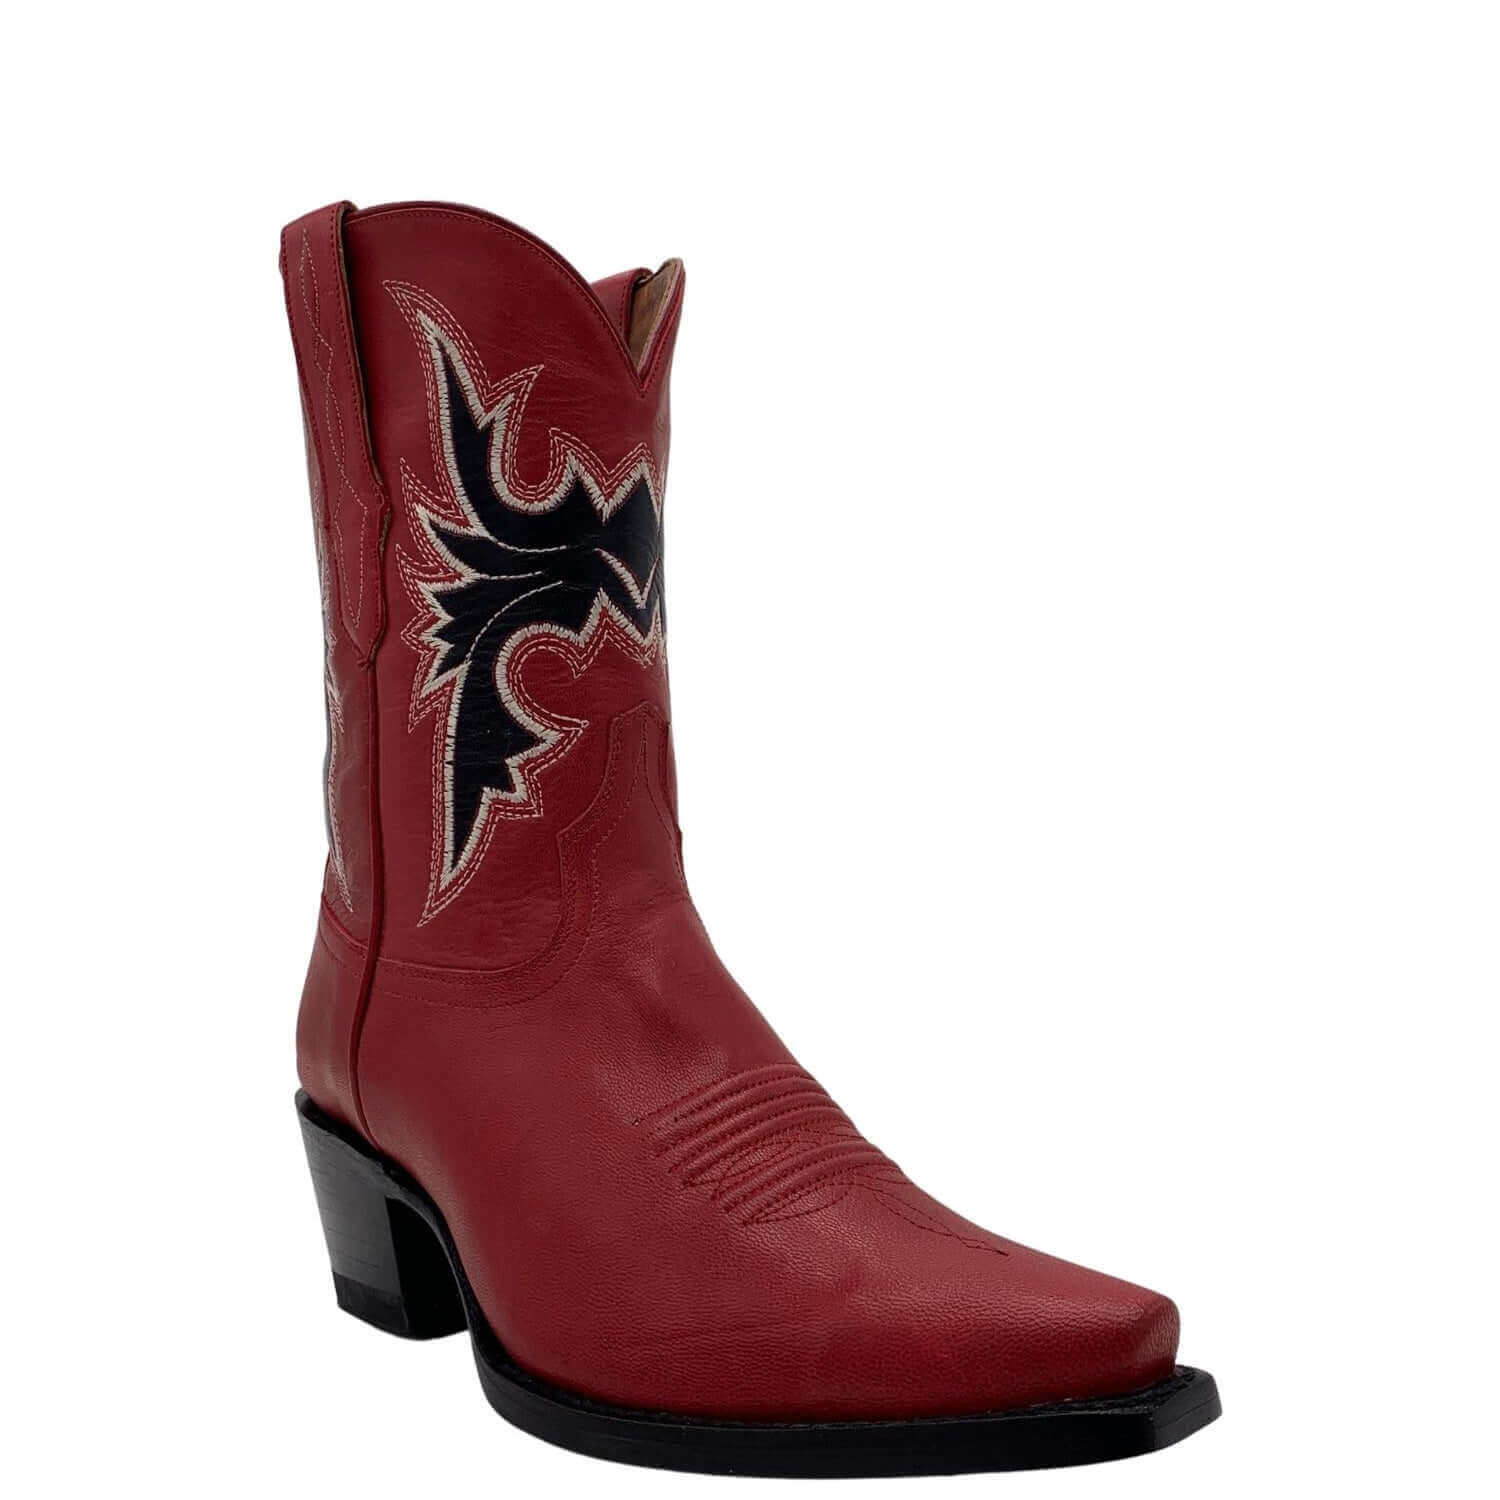 Women's Boots - Vaccari Boots